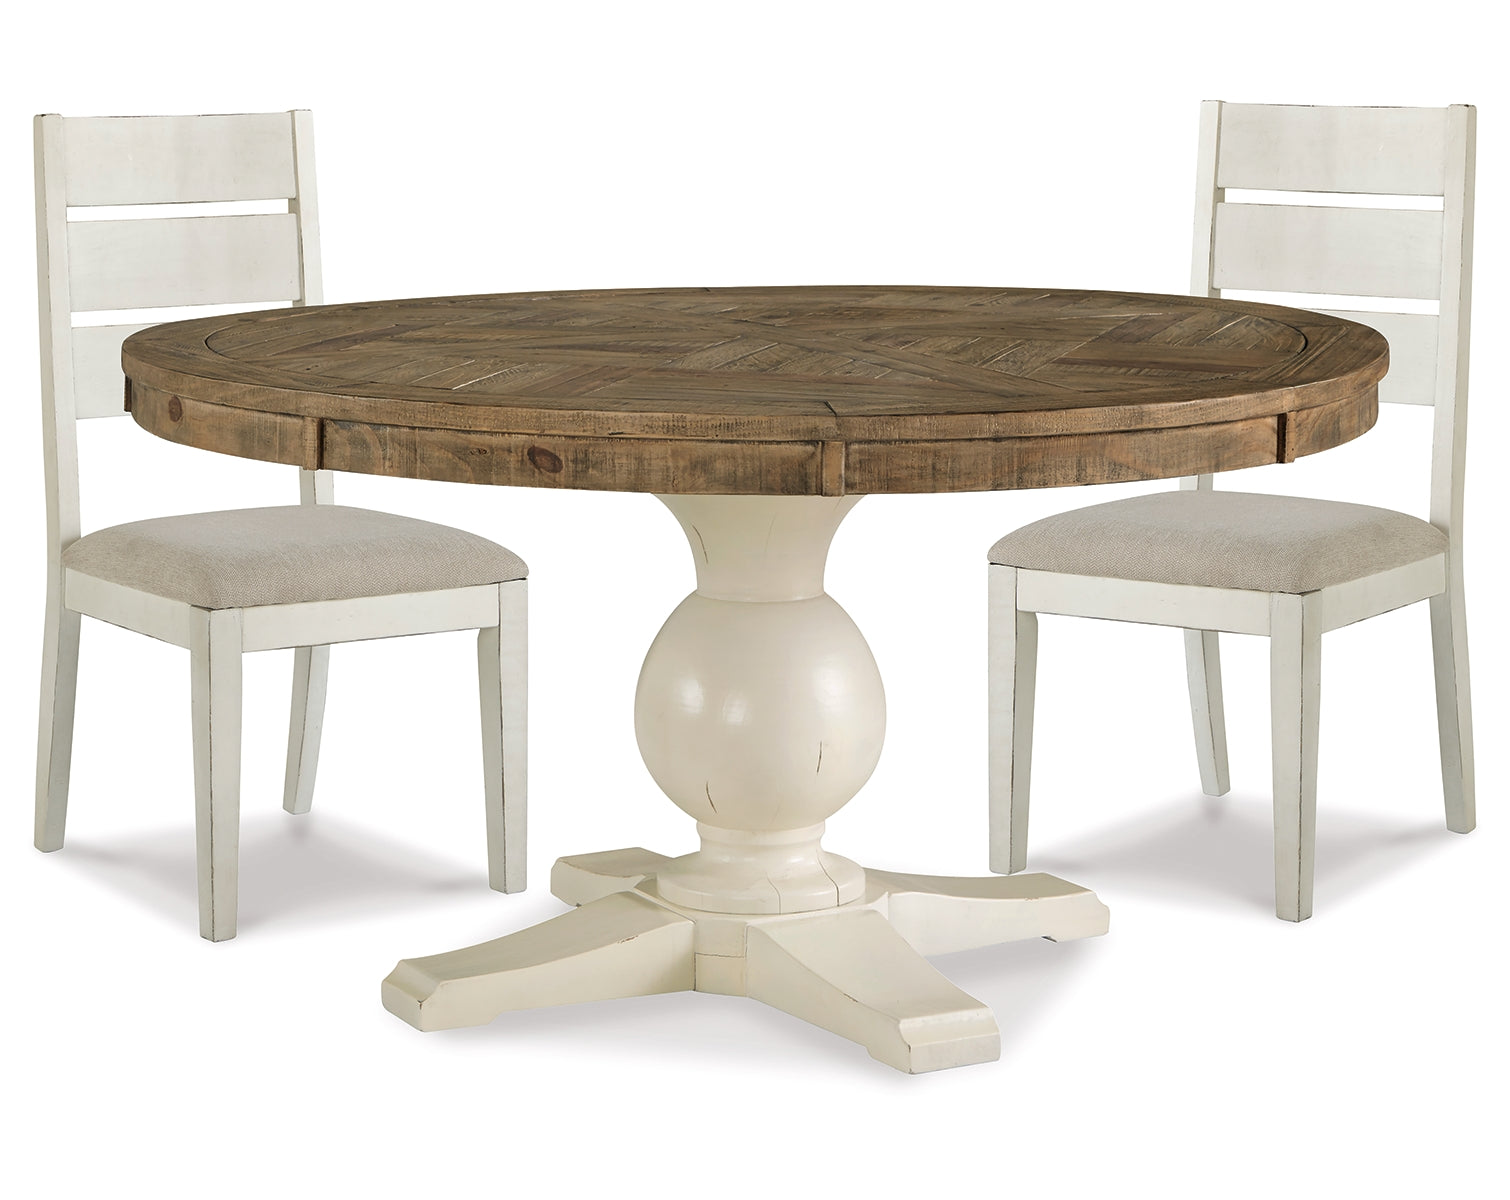 Grindleburg Dining Table and 2 Chairs